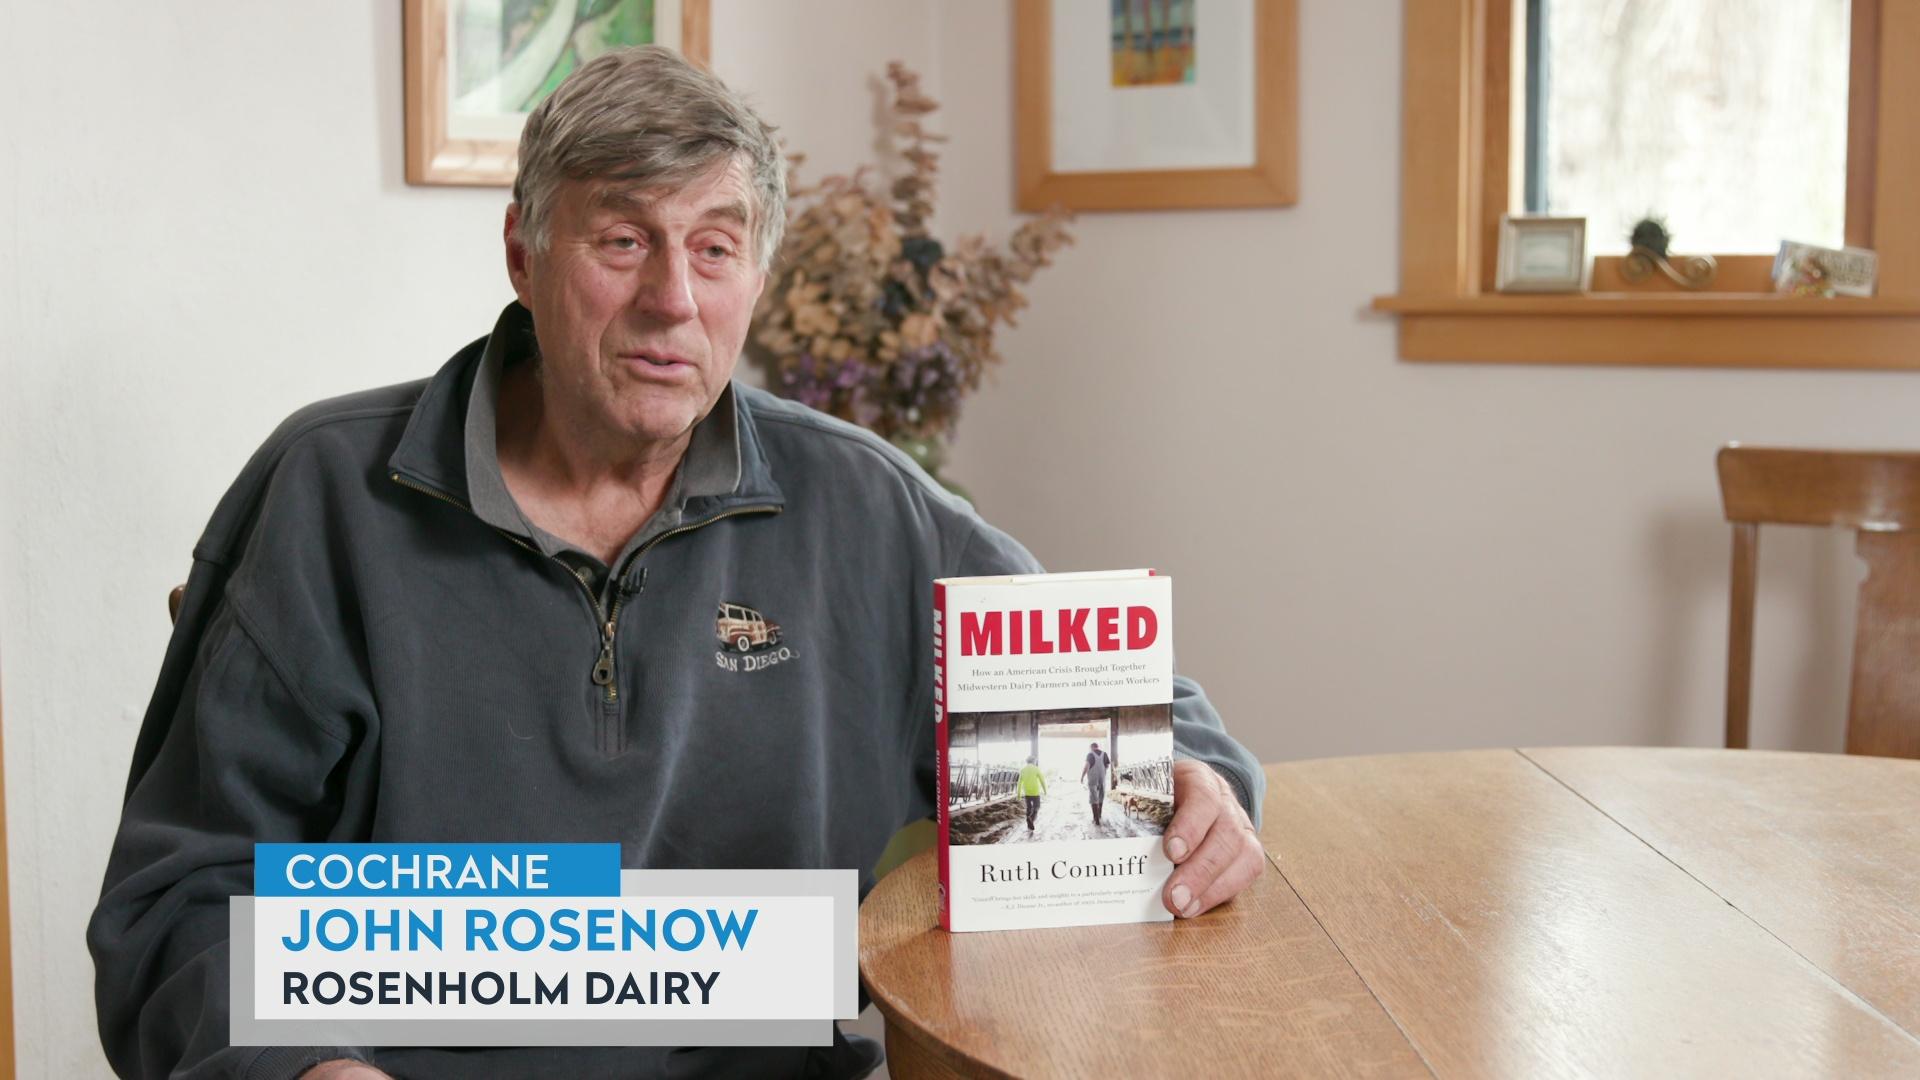 John Rosenow on staffing a dairy farm with immigrant labor